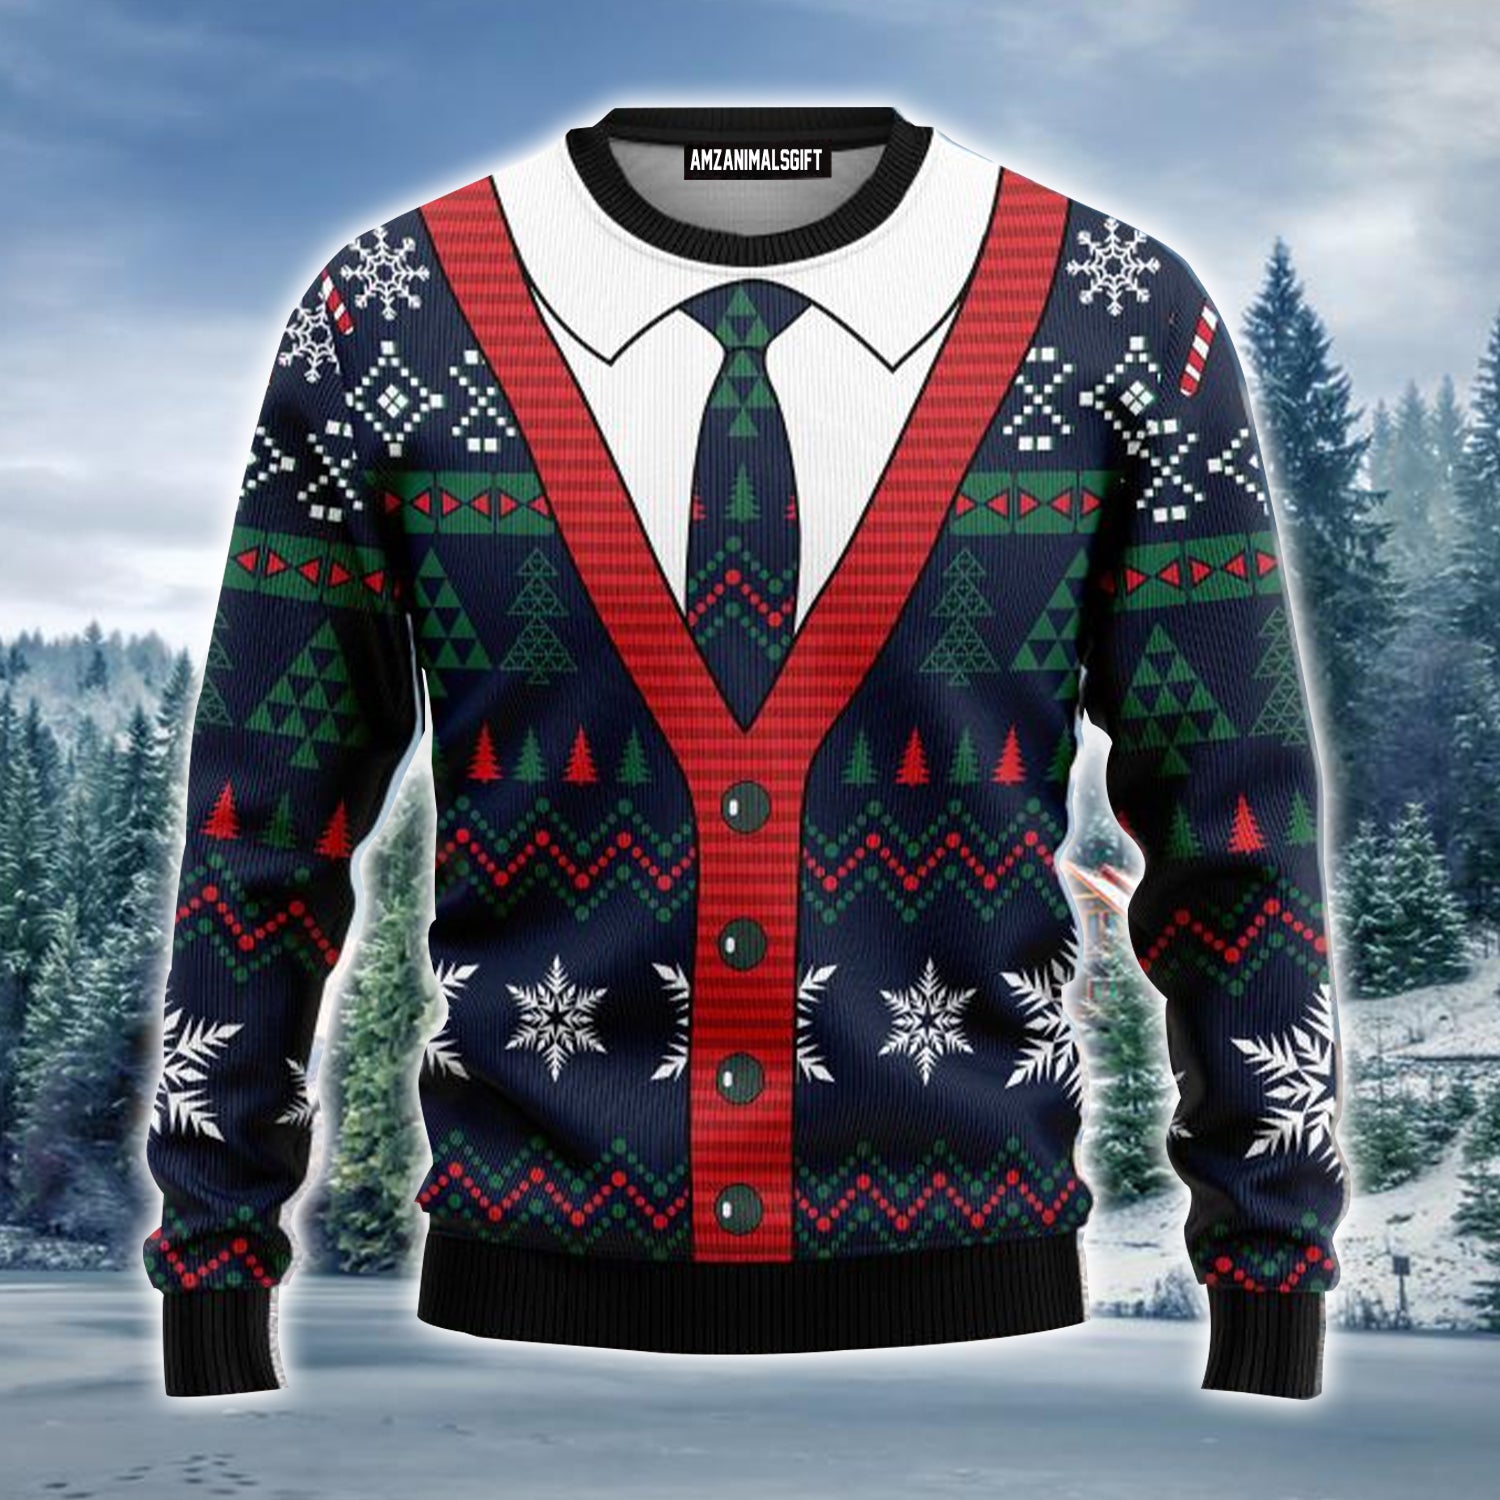 Christmas Cardigan Ugly Christmas Sweater, Christmas Pattern, Funny Christmas Ugly Sweater For Men & Women - Gift For Christmas, Friends, Family